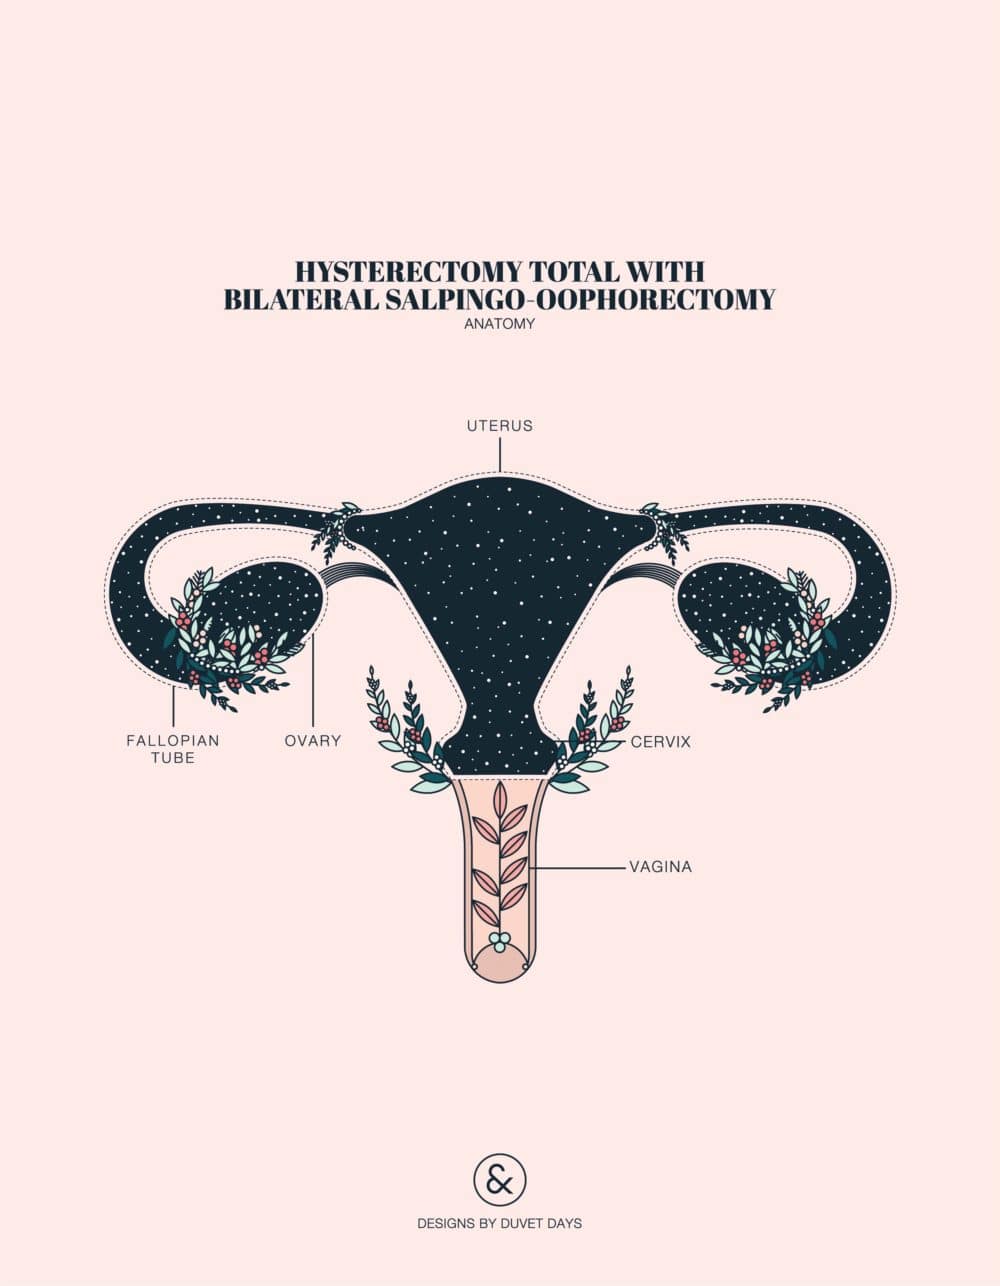 Designs By Duvet Days_8.5x11_Hysterectomy Total with Bilateral Salpingo-Oophorectomy_Preview